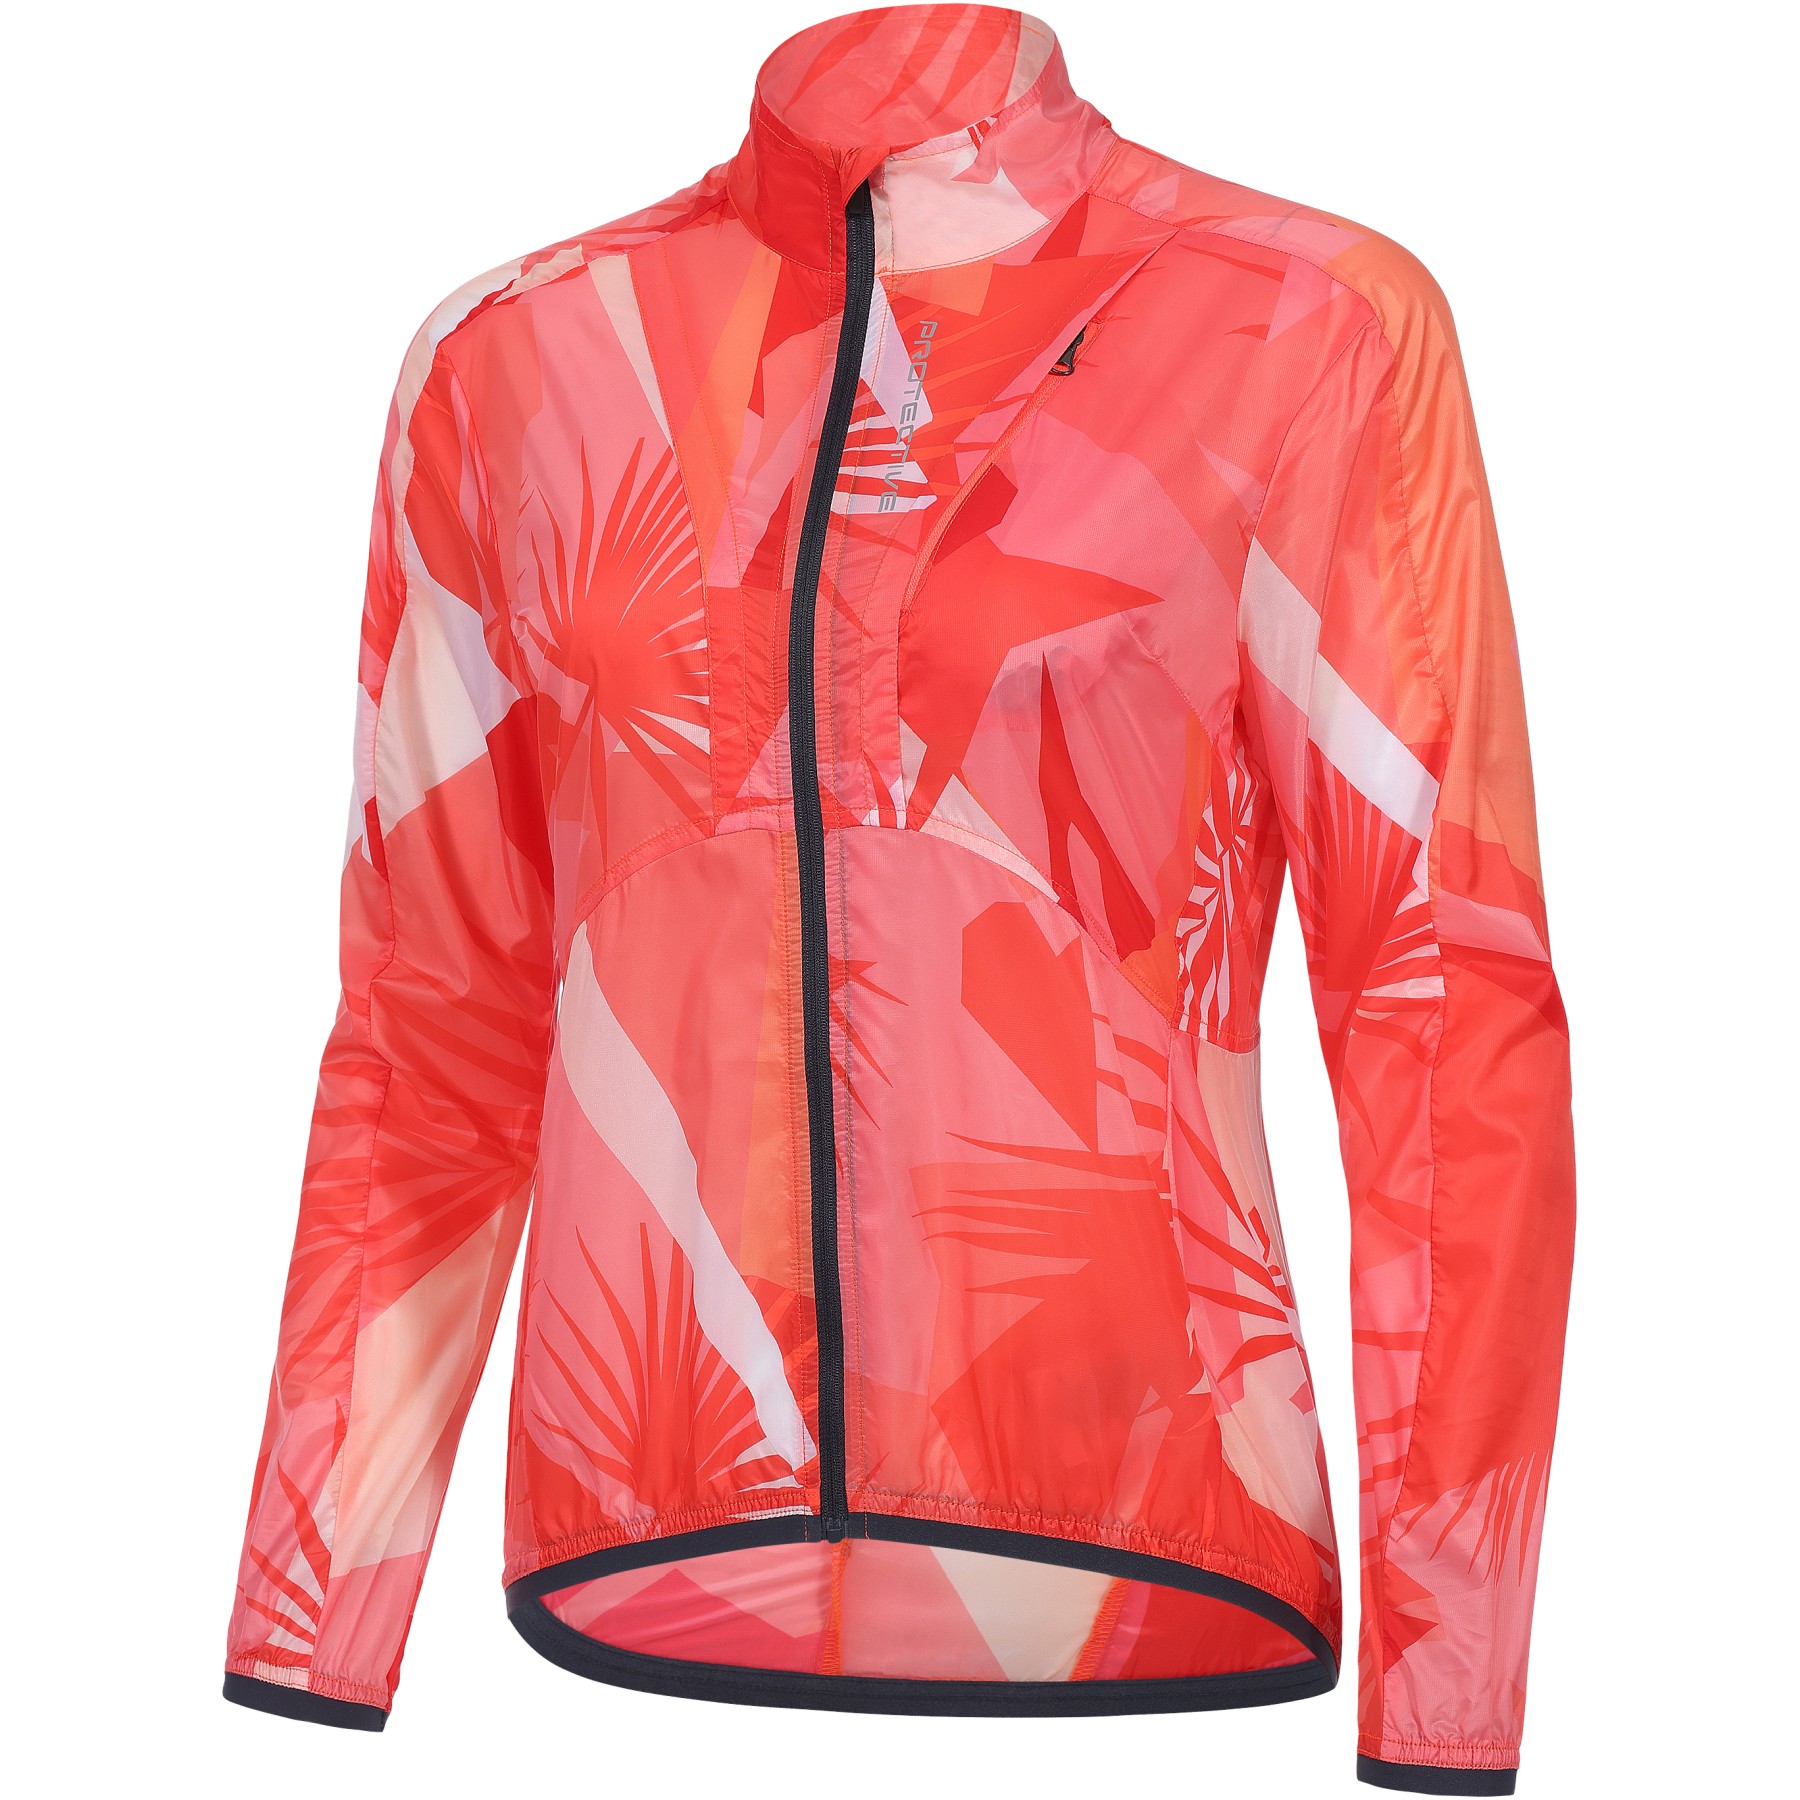 Productfoto van PROTECTIVE P-Rise Up Berry Island Jas Dames - fiery coral